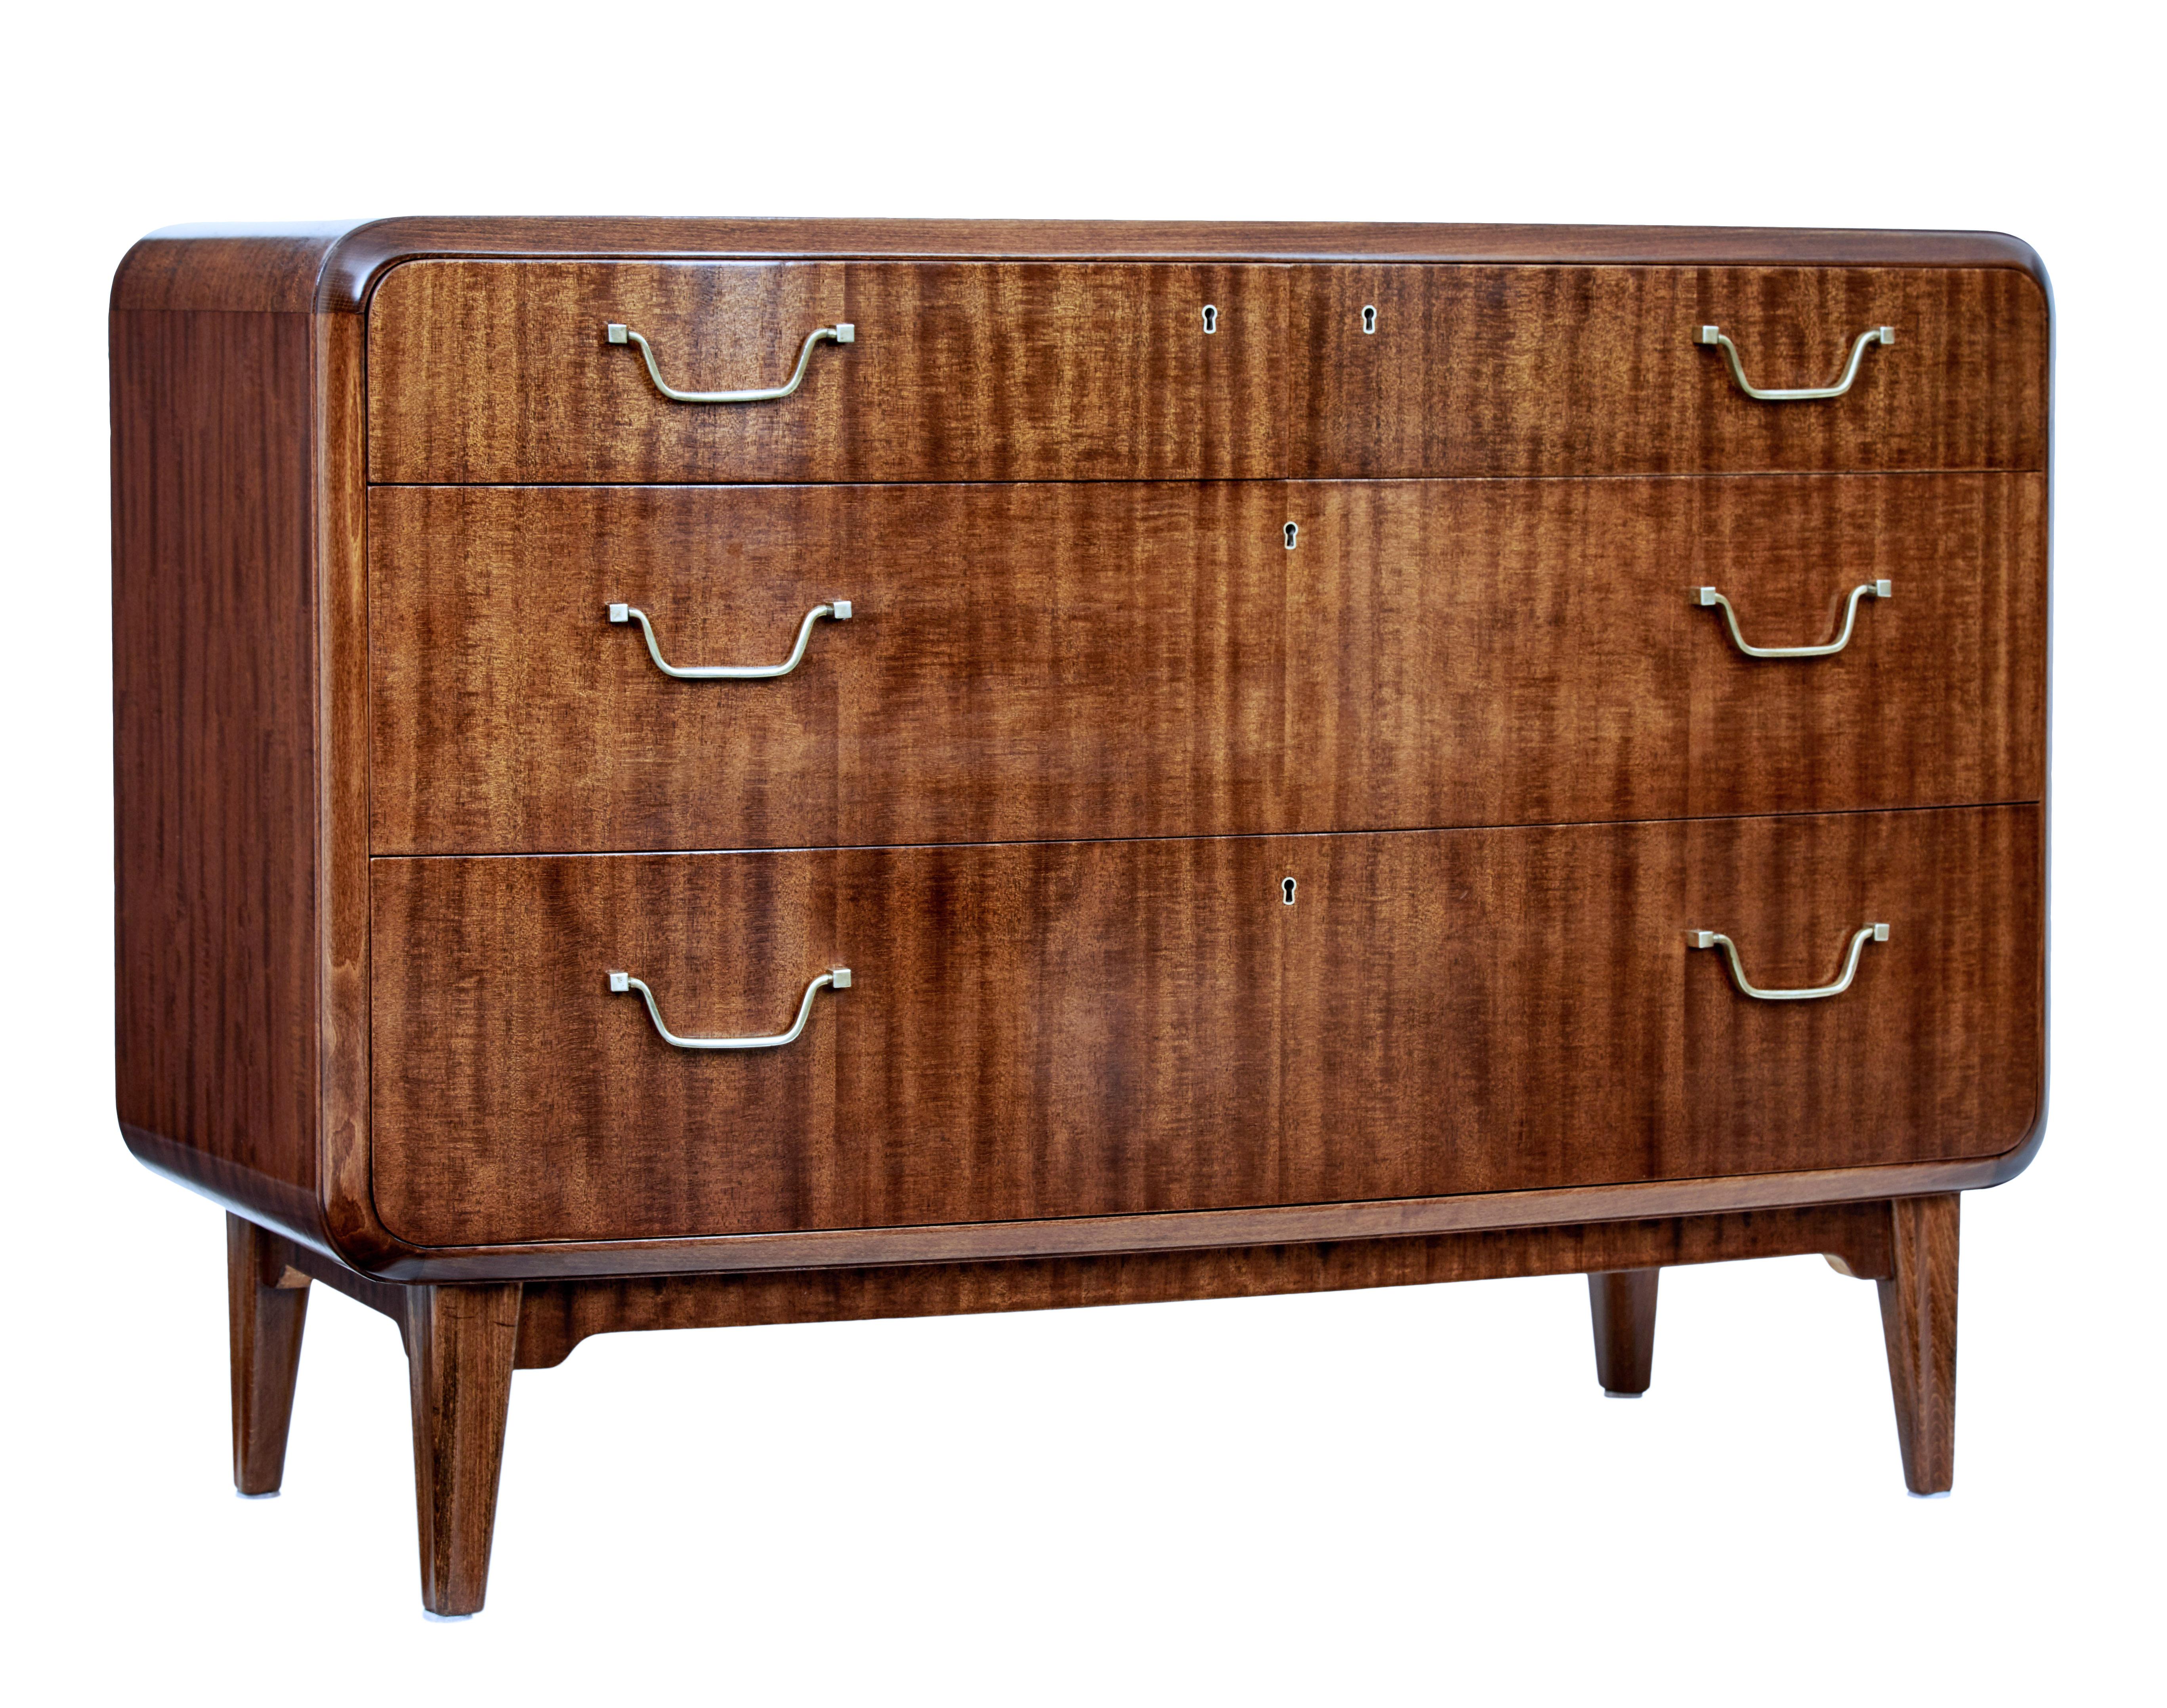 Mid-20th century mahogany 3-piece bedroom suite by SMF Bodafors, circa 1950.

Stunning set comprising of a chest of drawers and a pair of bedside tables, designed by well known Swedish designer Axel Larsson (1898-1975) for Swedish company